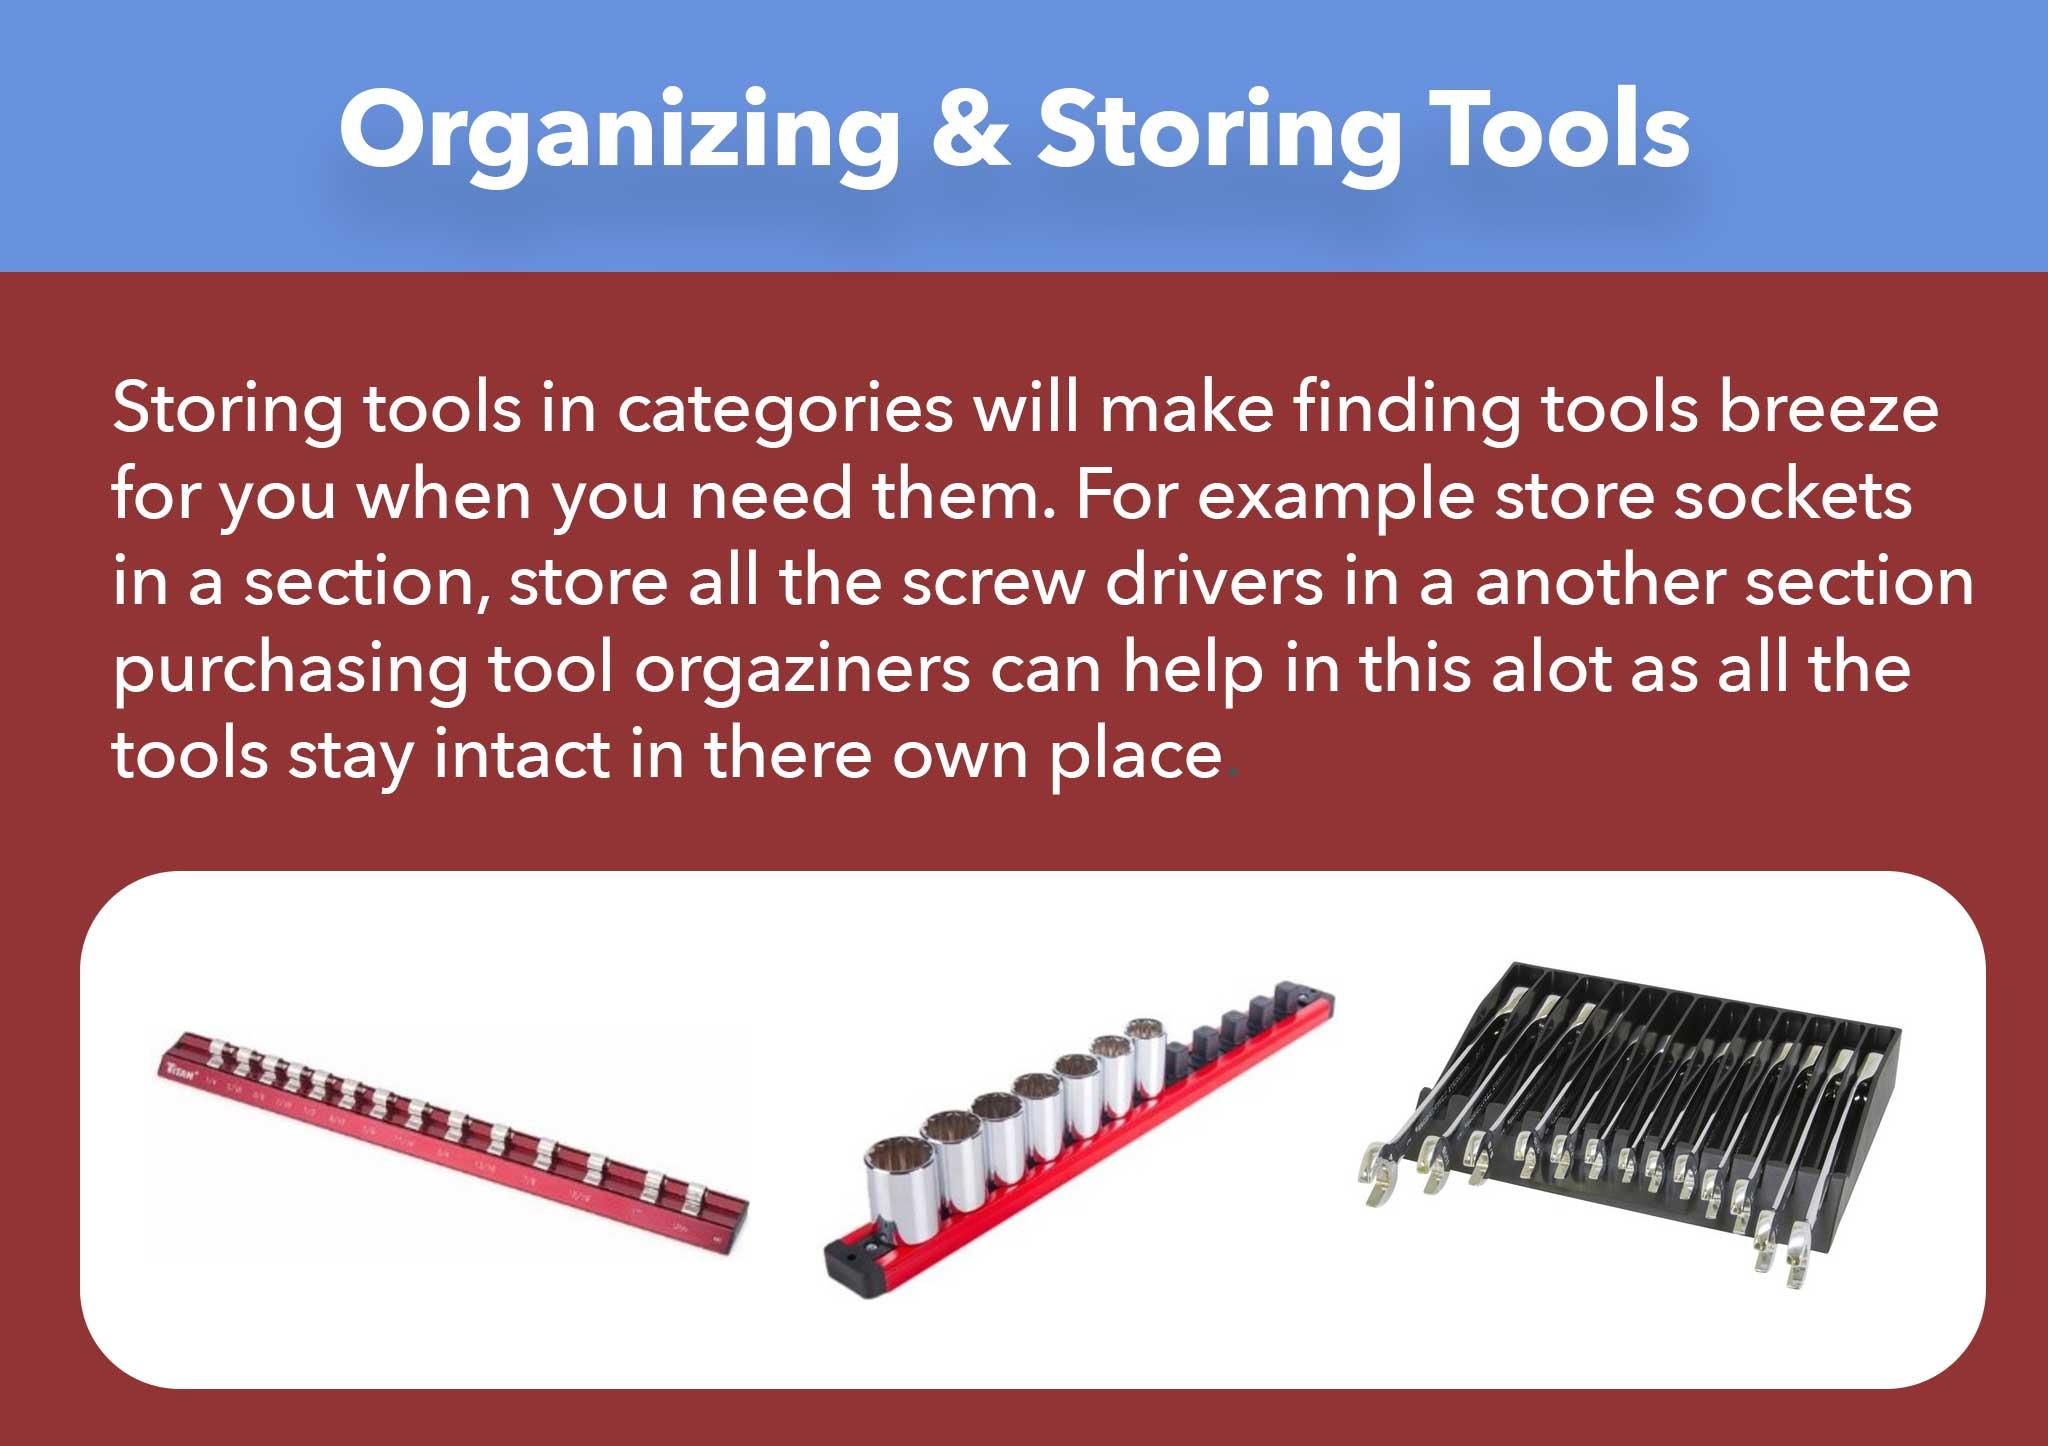 Storing tools in categories will make finding tools breeze  for you when you need them. For example store sockets in a section, store all the screw drivers in a another section purchasing tool orgaziners can help in this alot as all the  tools stay intact in there own place.